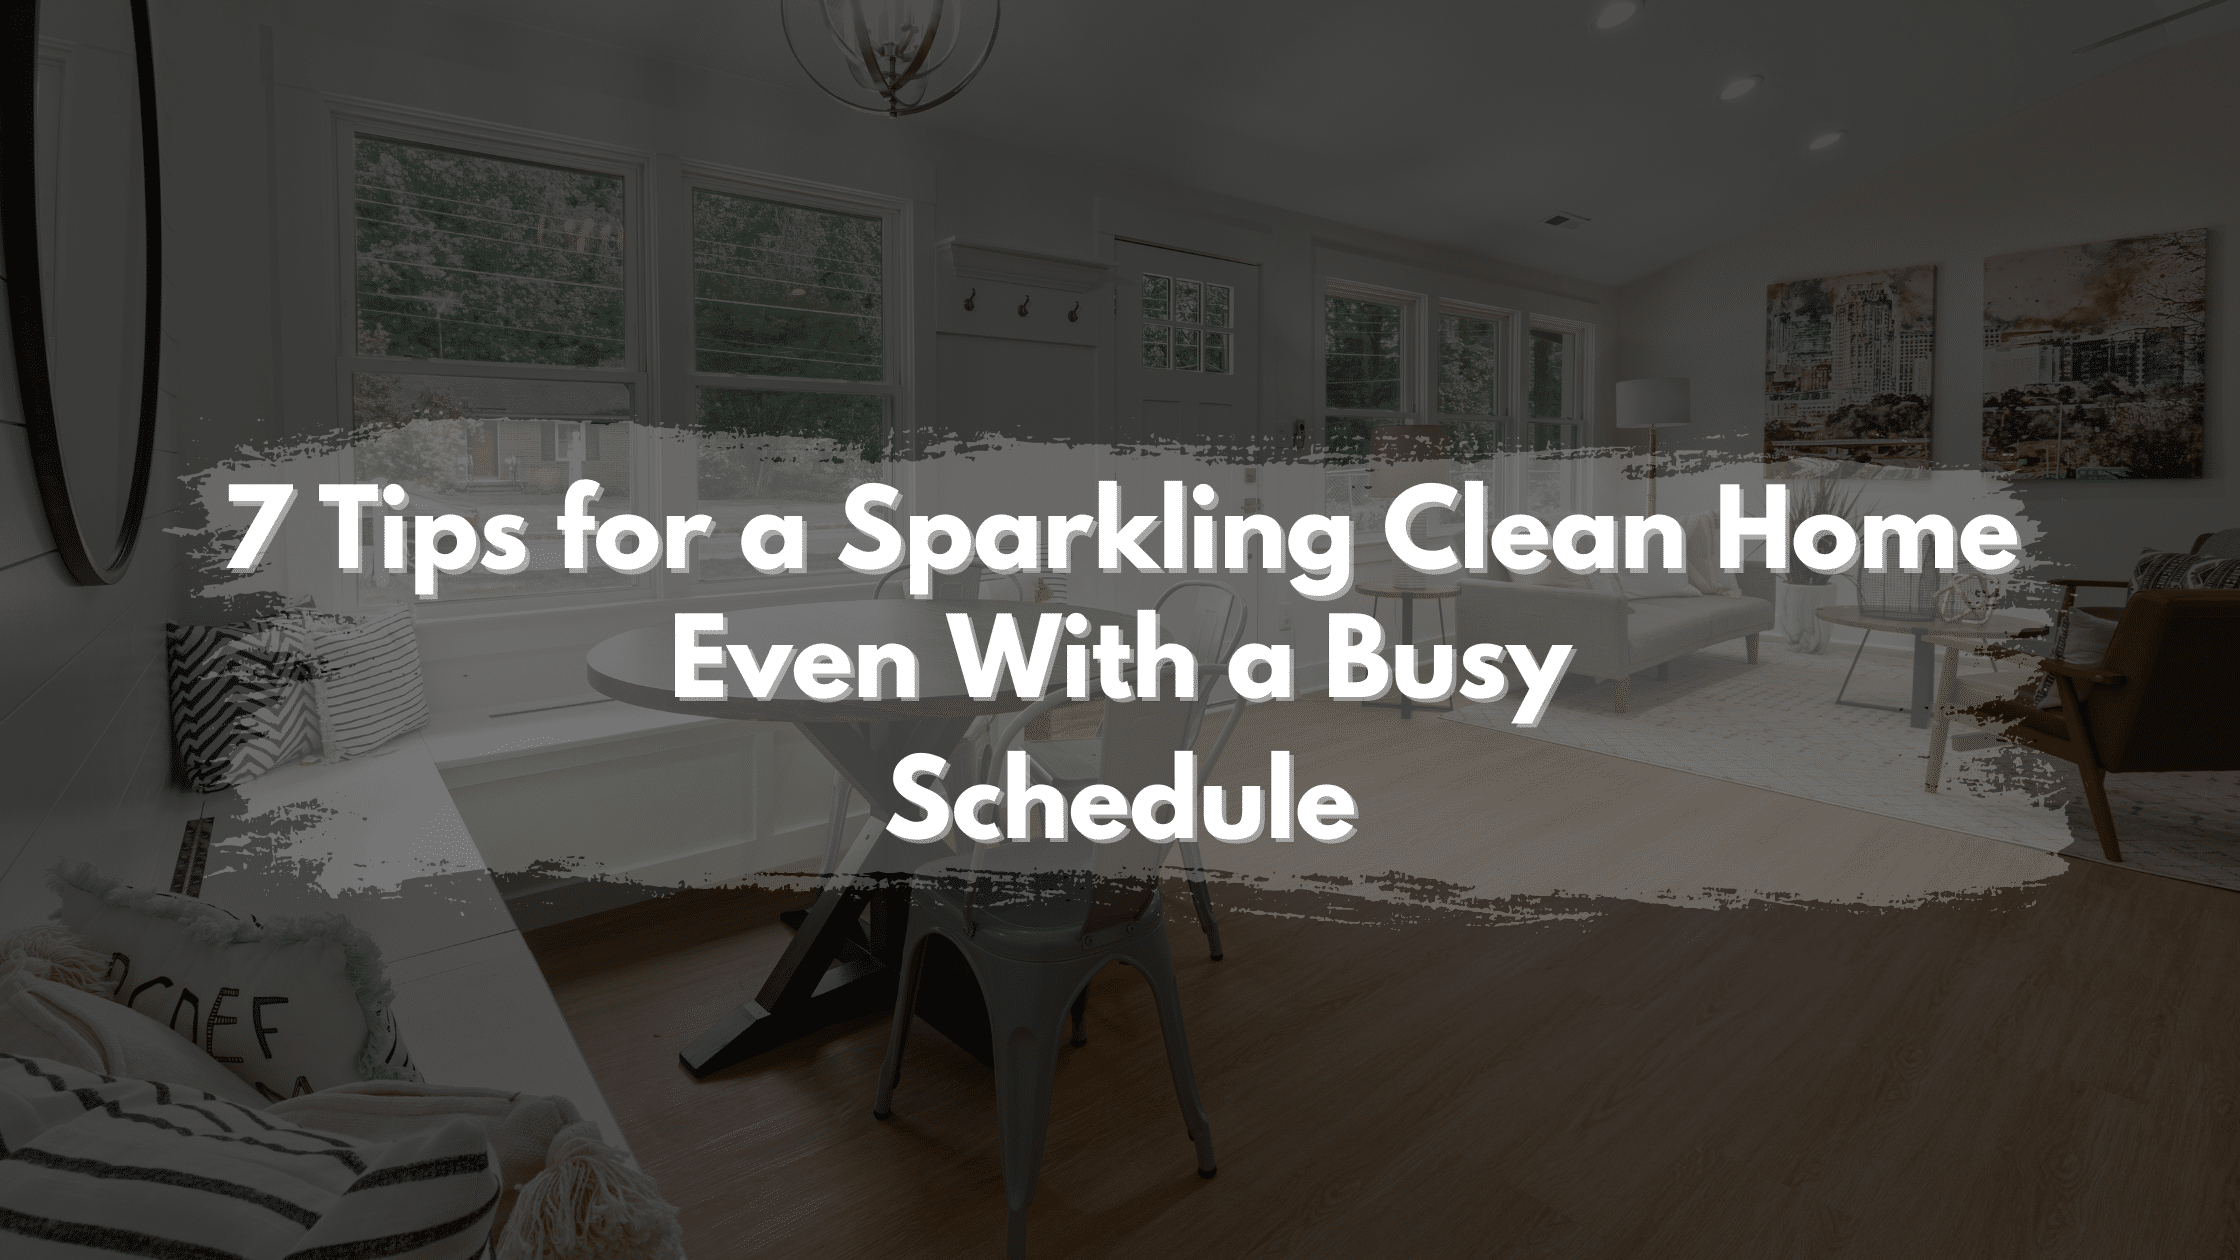 7 Tips for a Sparkling Clean Home - Even With a Busy Schedule